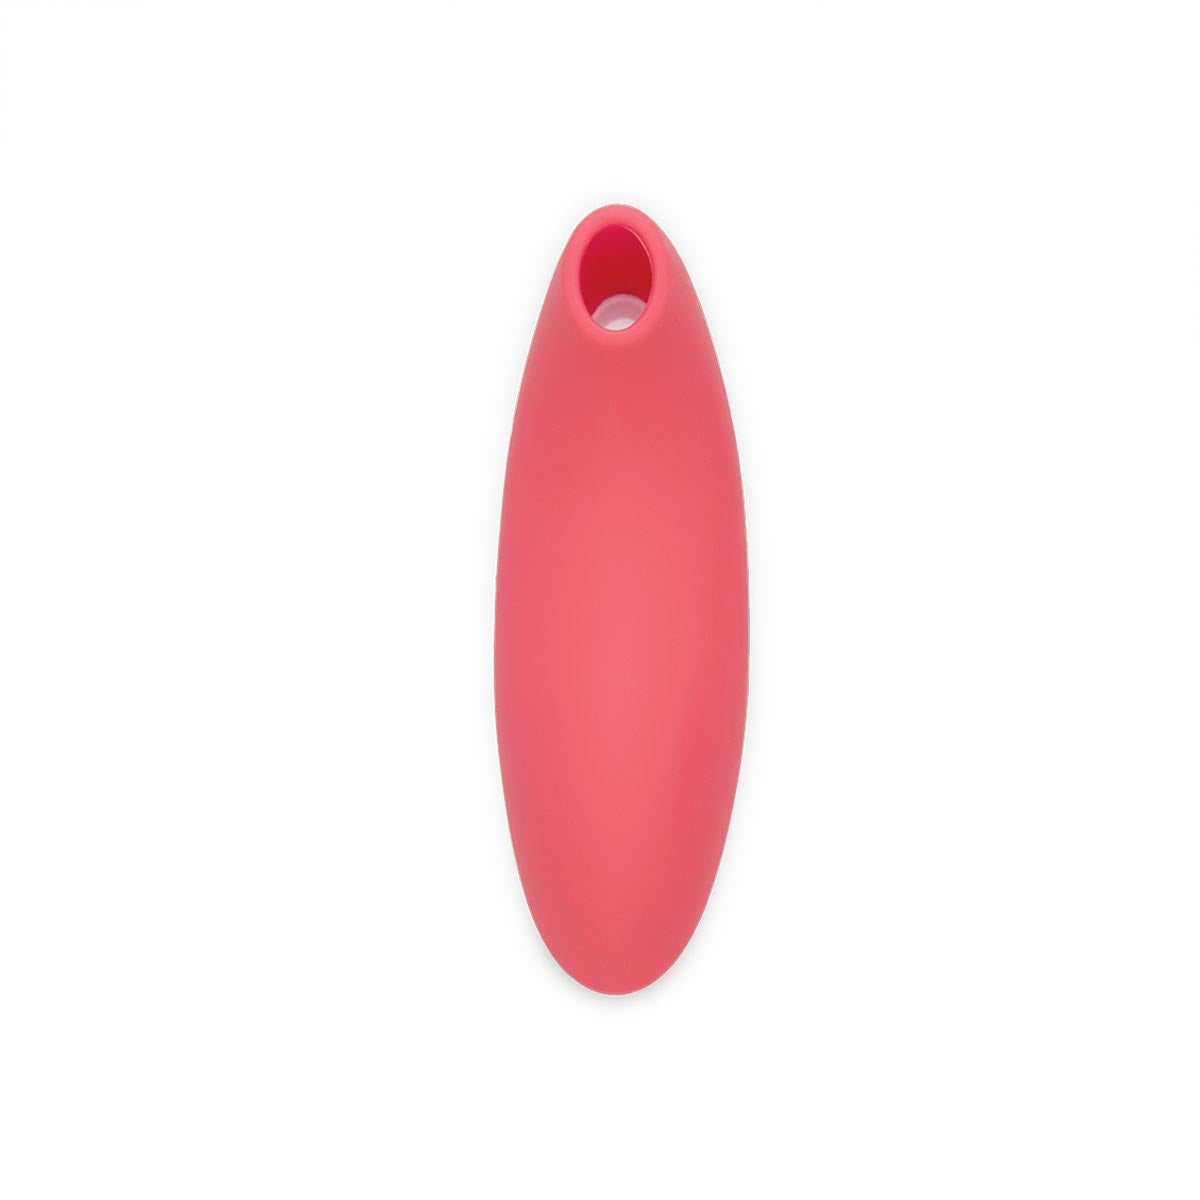 Front view of orange silicone air pressure clitoral stimulator with round opening Nudie Co